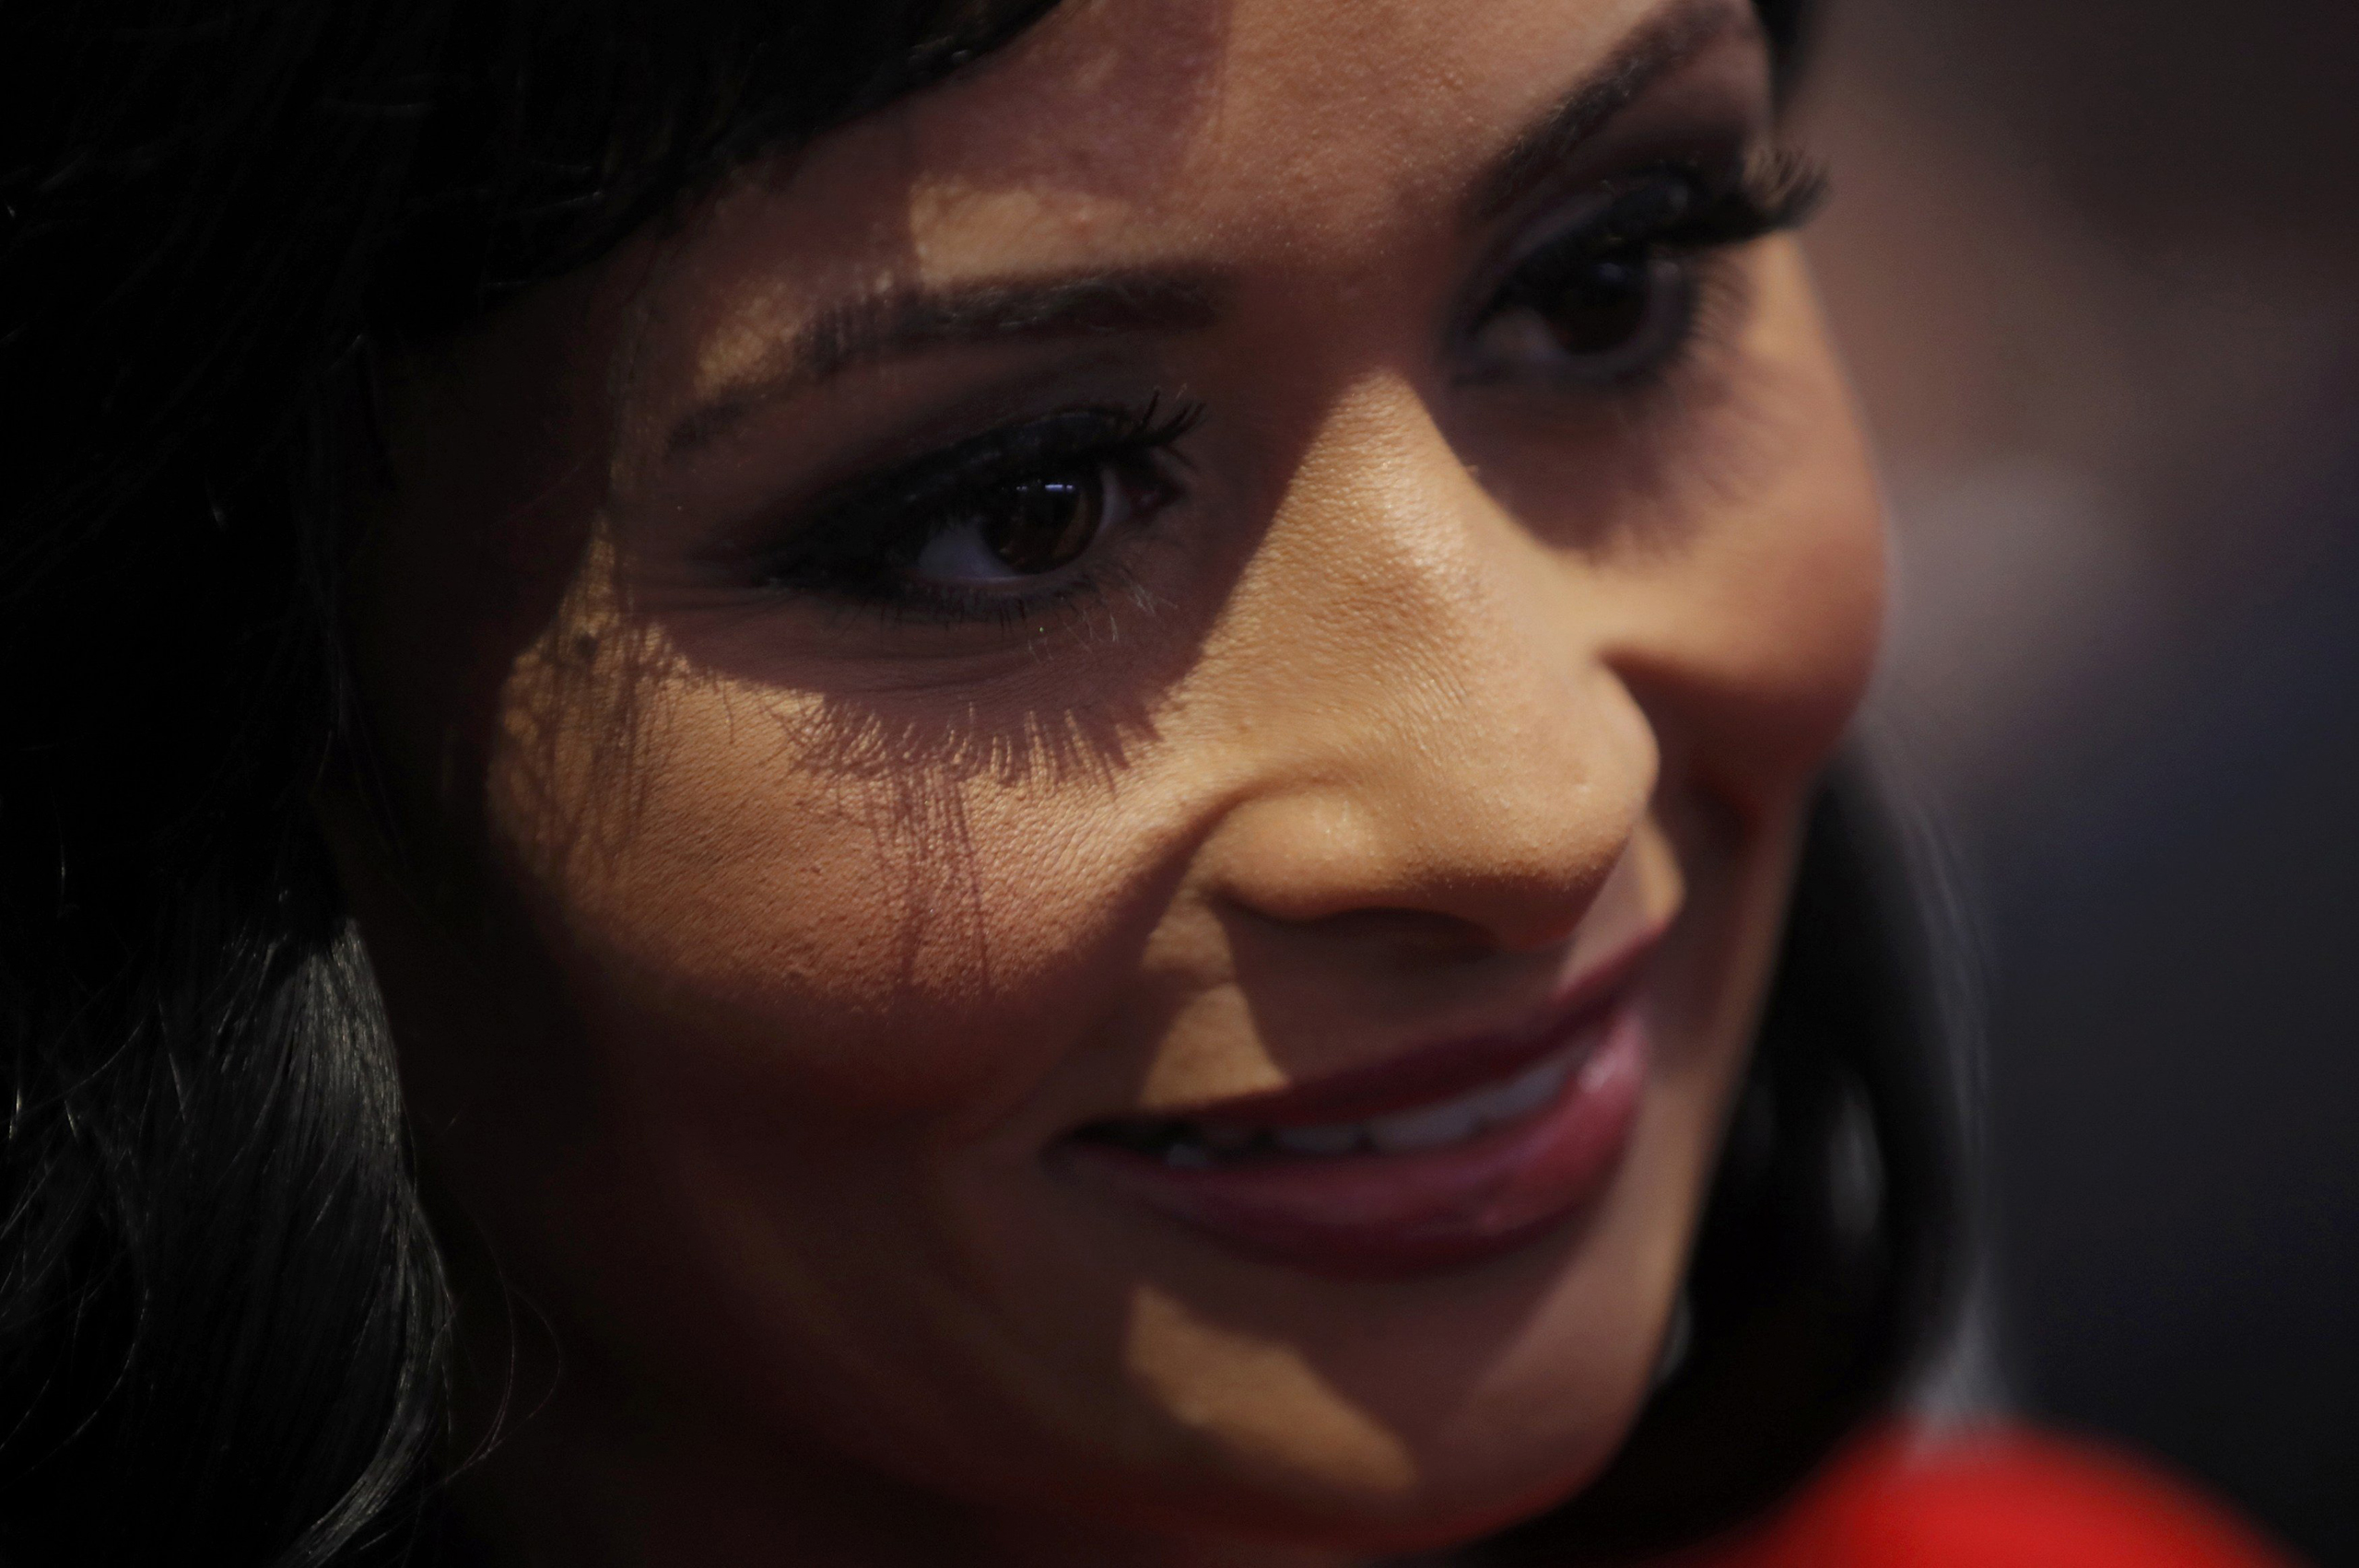 Republican presidential nominee Donald Trump's spokesperson Katrina Pierson speaks with delegates on the floor at the start of the final session of the Republican National Convention in Cleveland on July 21, 2016. (Brian Snyder—Reuters)